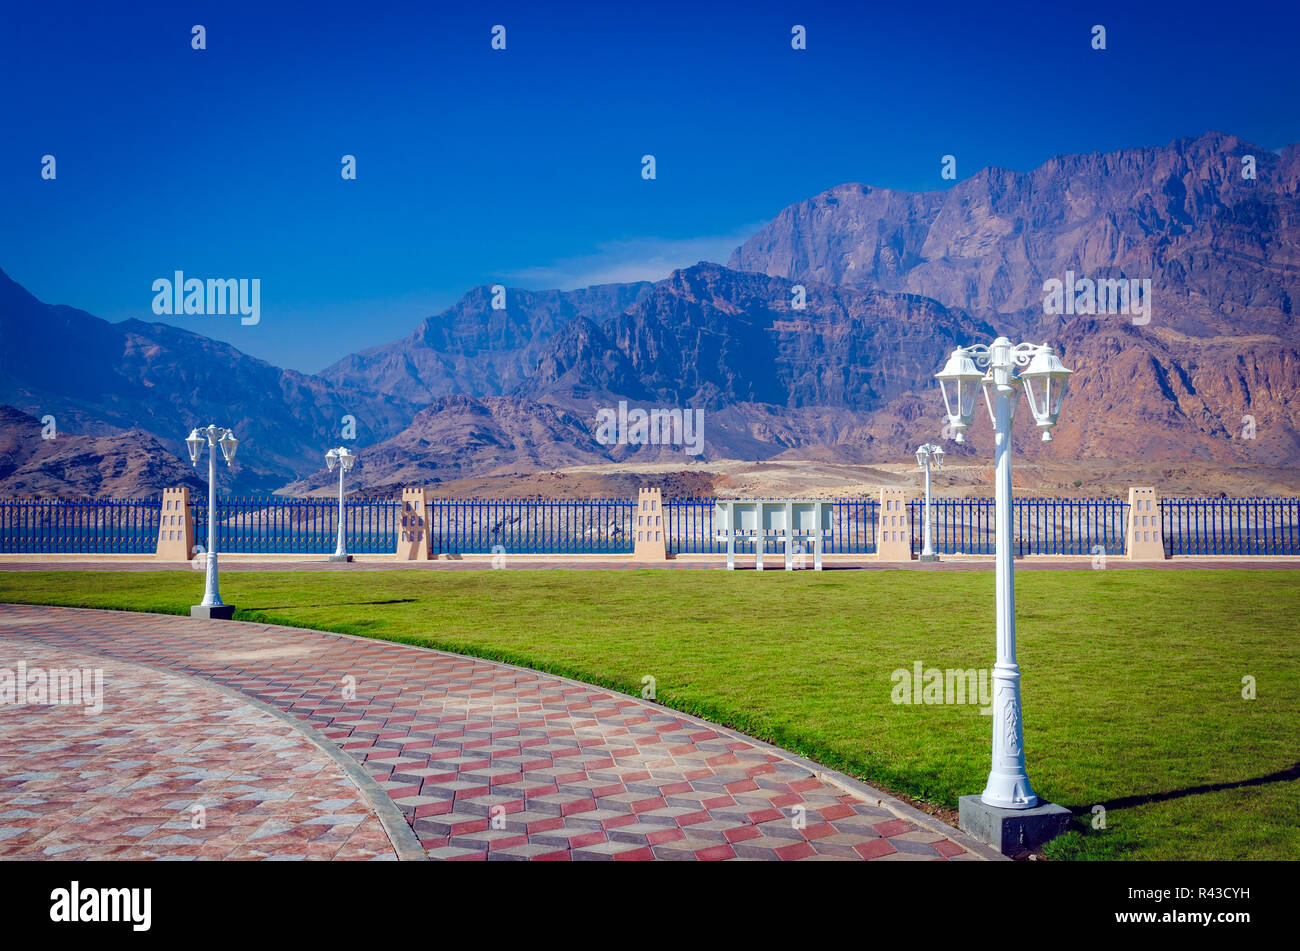 Traditional white lampposts in a park with a beautiful mountain scenery as backdrop. From Muscat, Oman. Stock Photo